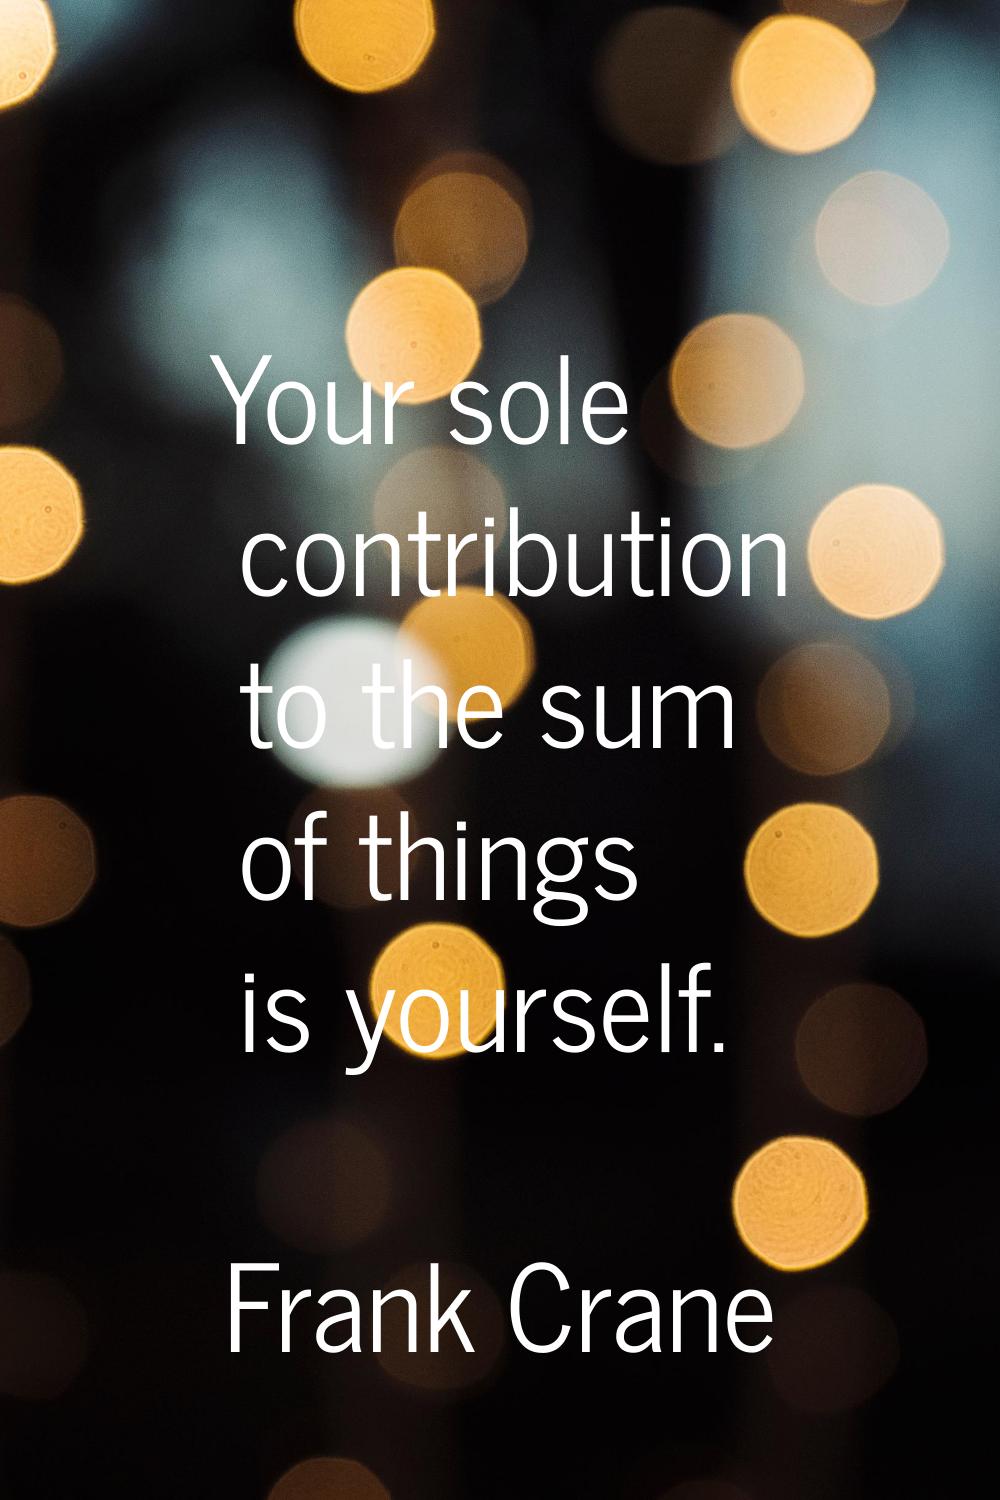 Your sole contribution to the sum of things is yourself.